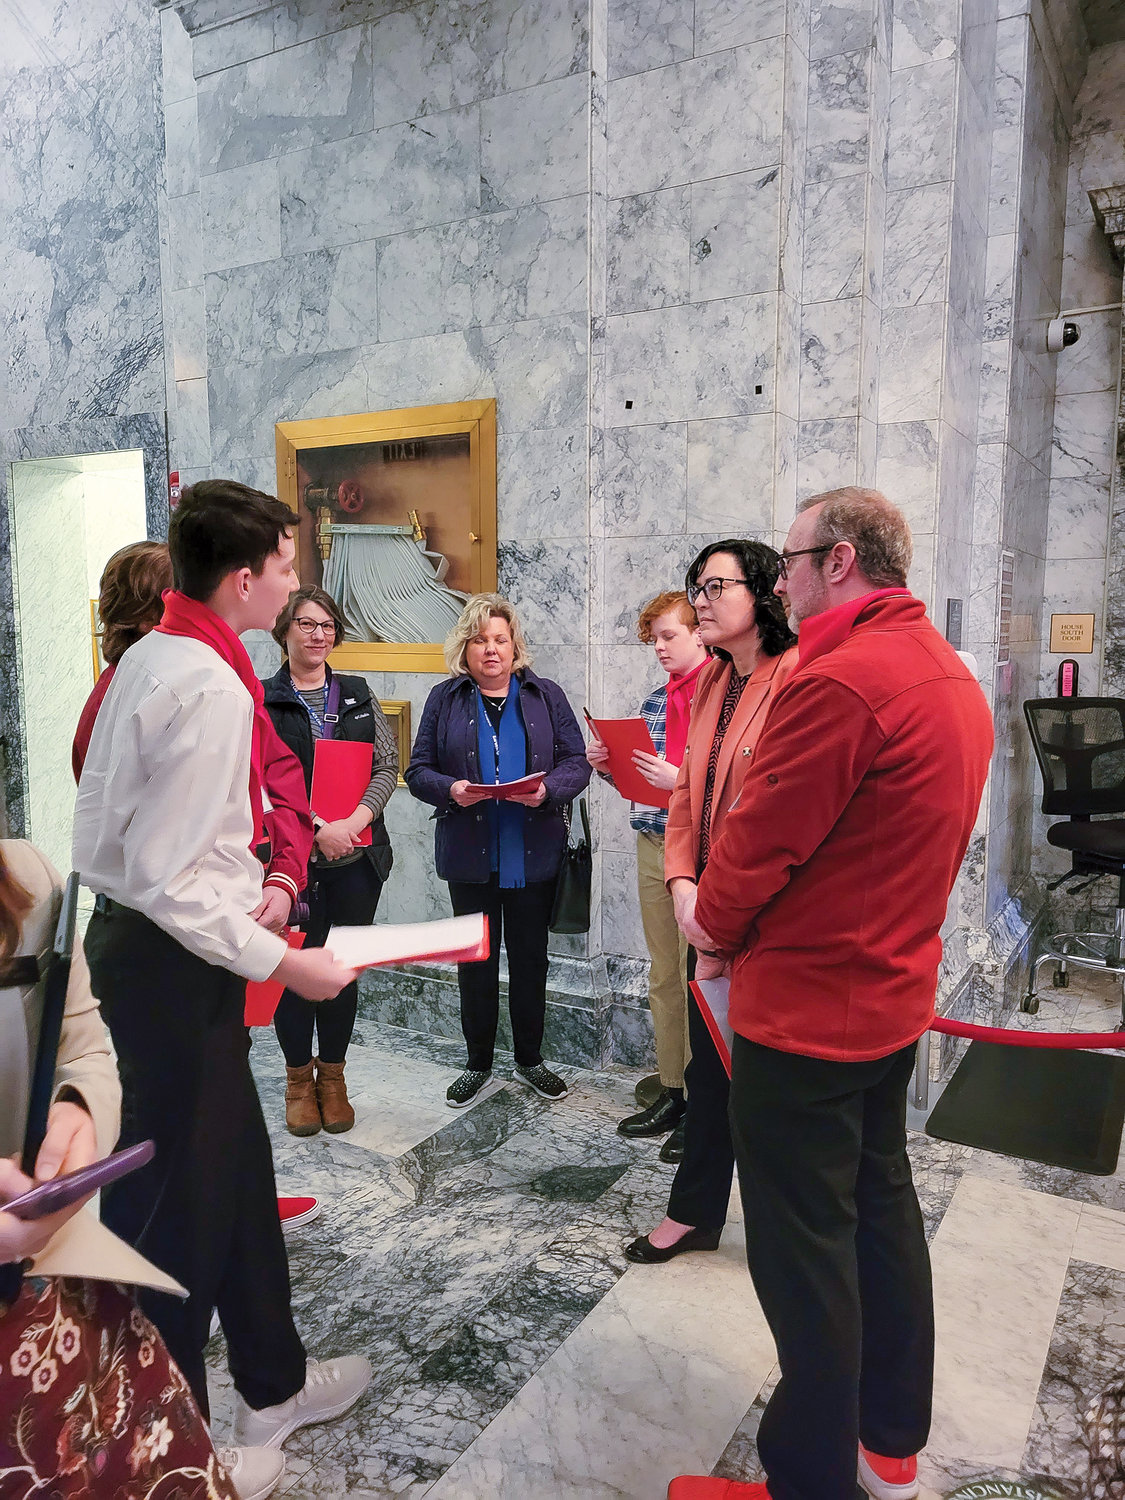 DREAM Team members Brigham Sorensen, Lucas Goranson and Micah Hoyt talk with Rep. Stephanie McClintock outside of the Senate Chamber at the Washington State Capitol on March 6.